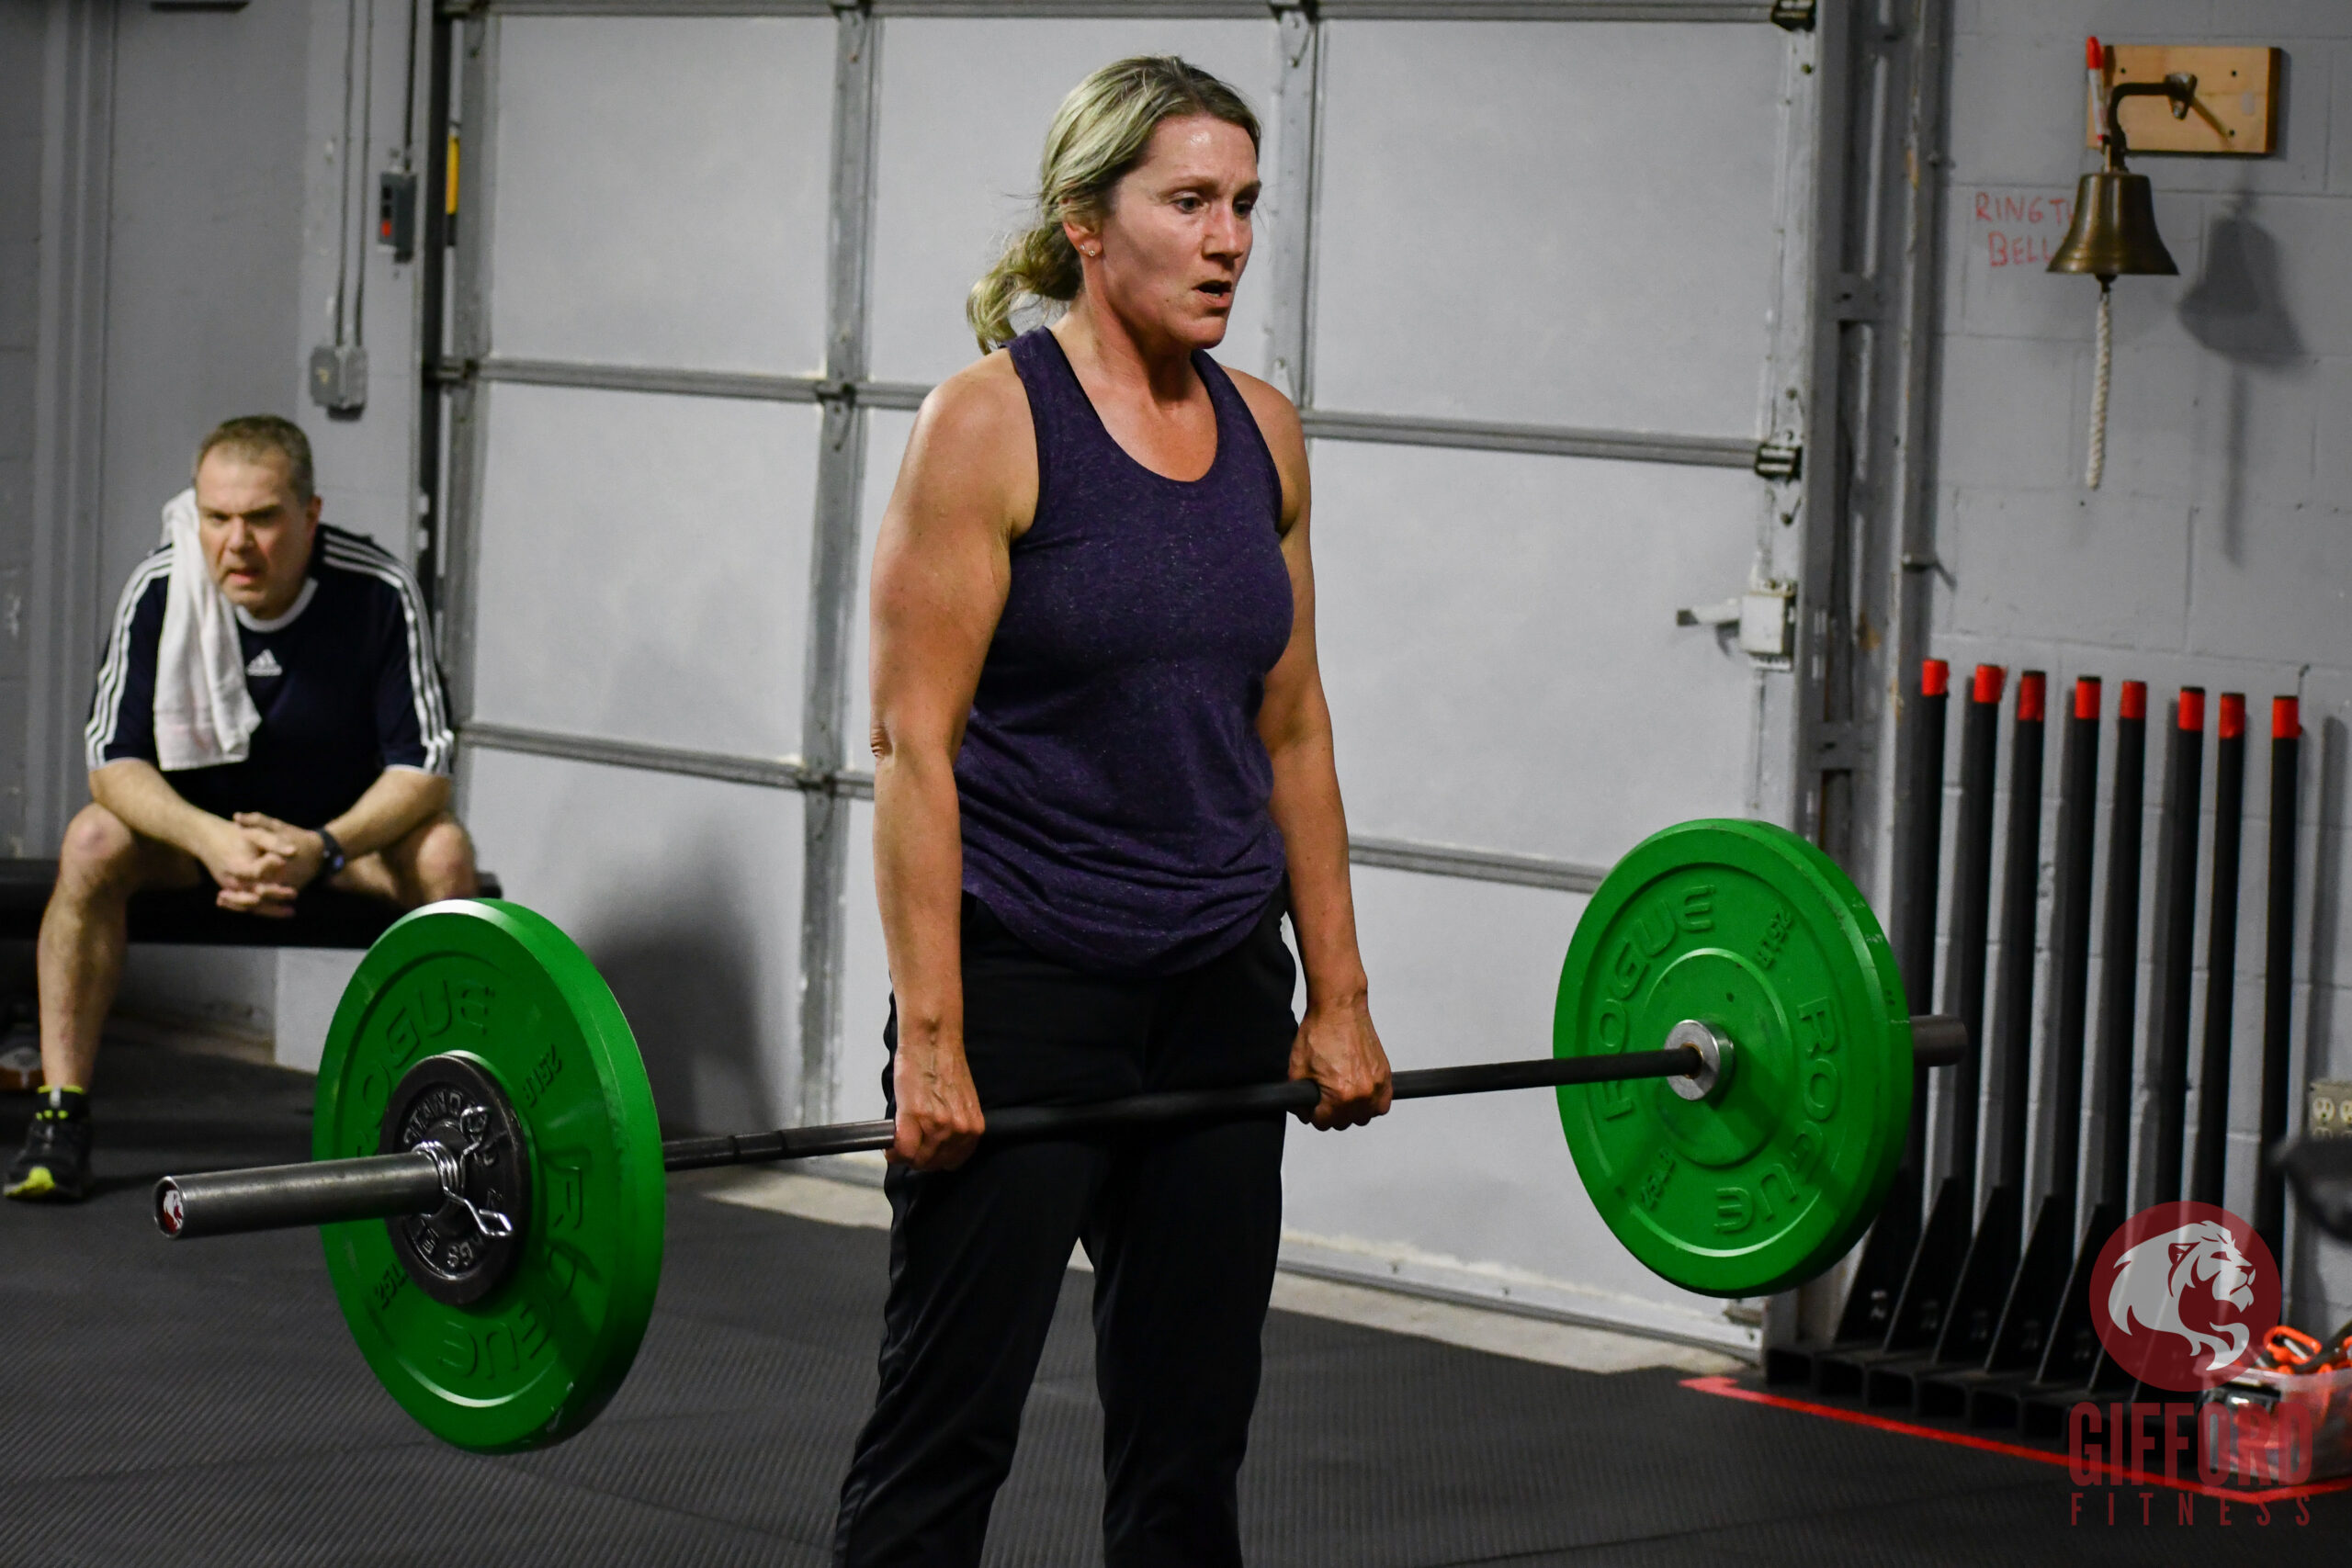 Angie stands at the top of a deadlift with barbell in hand